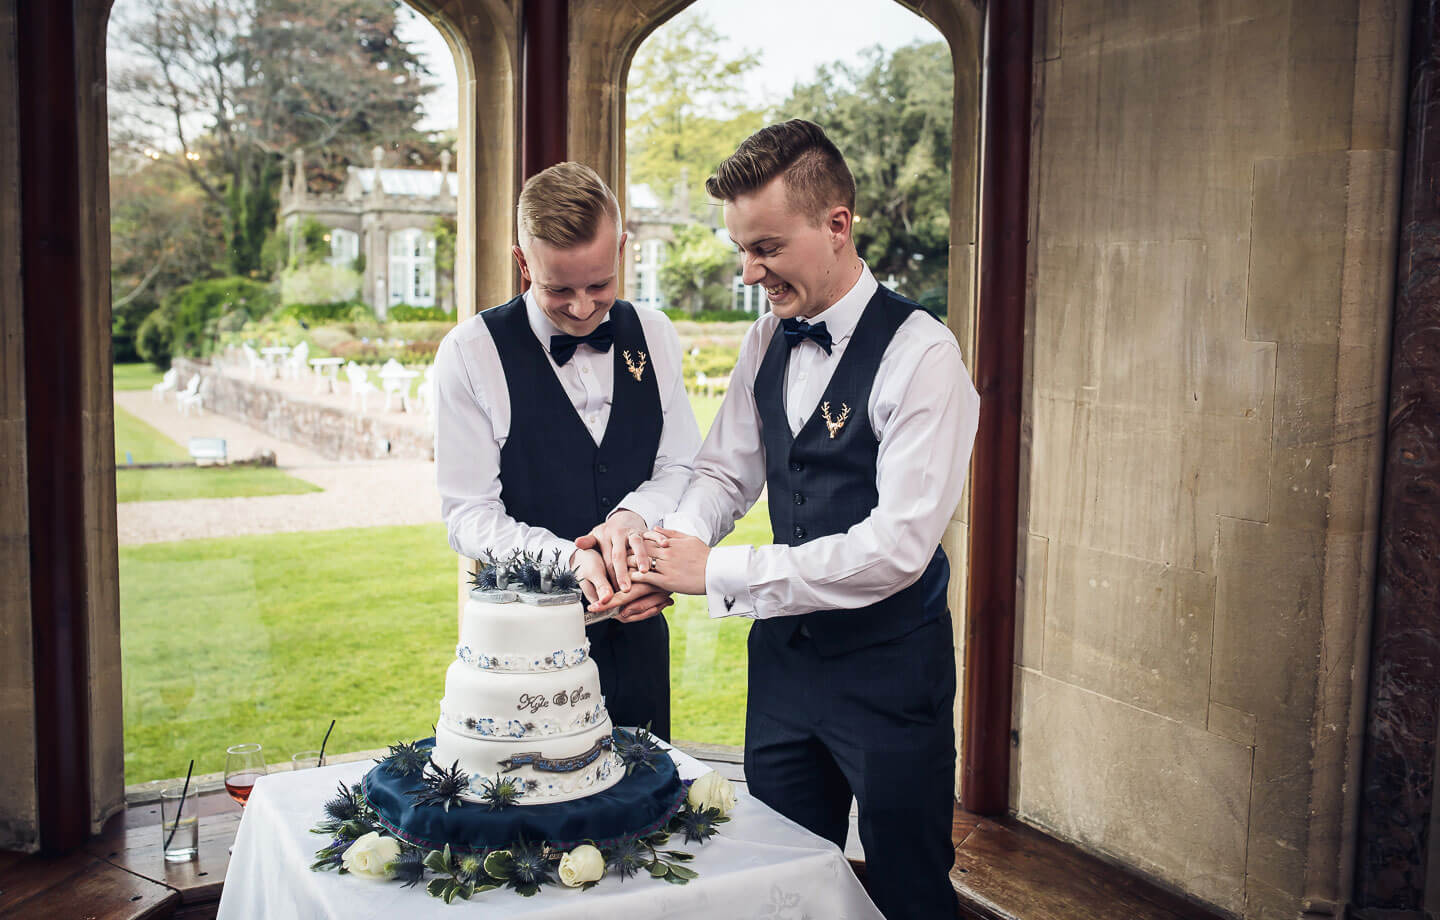 Sam at his gay wedding photos cutting the cake image copyright Shooting Pixels featured on The Gay Wedding Guide 3 5